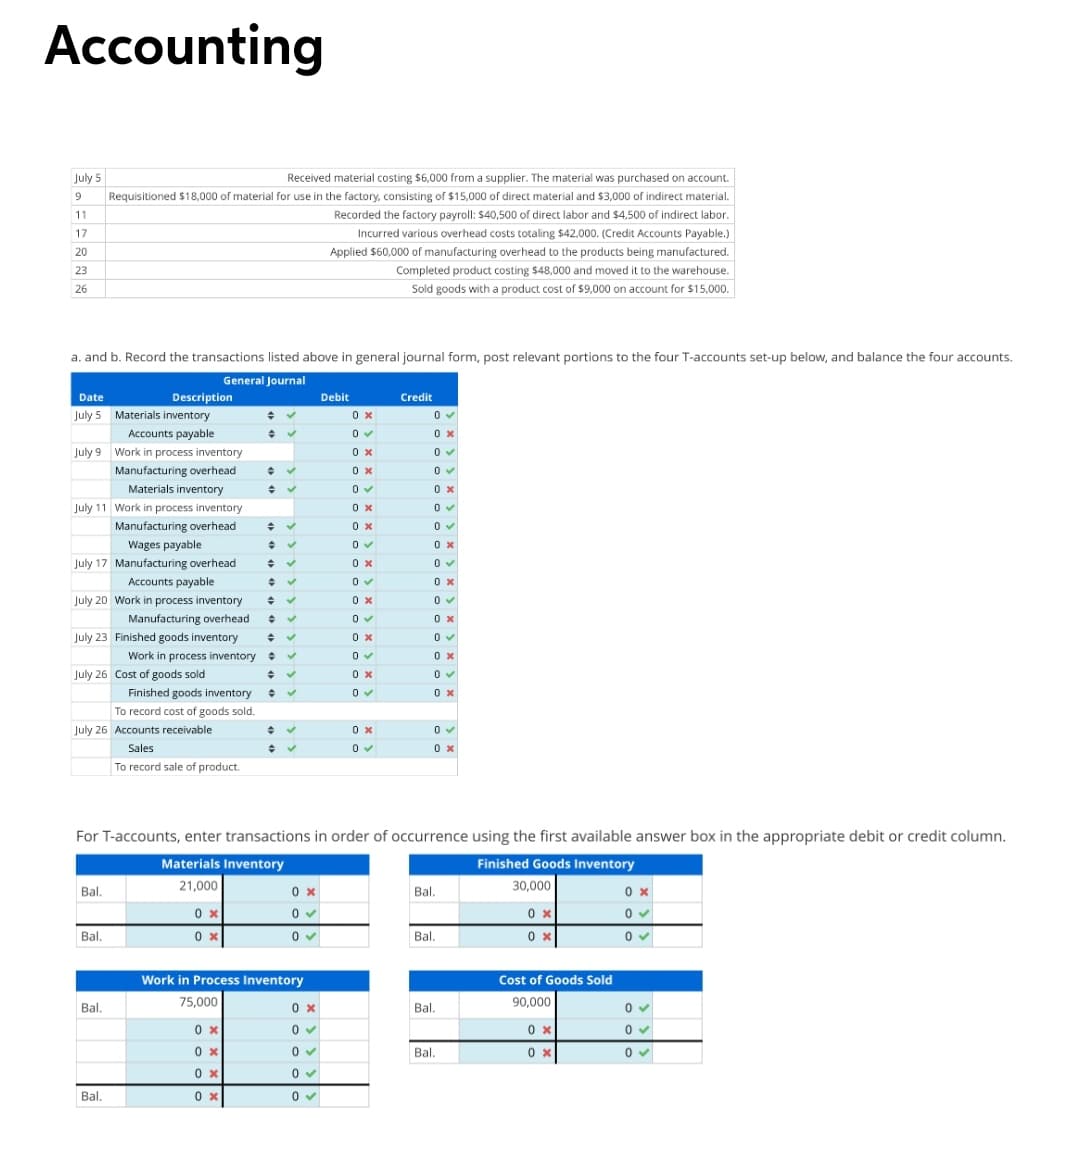 Accounting
July 5
Received material costing $6,000 from a supplier. The material was purchased on account.
9
Requisitioned $18,000 of material for use in the factory, consisting of $15,000 of direct material and $3,000 of indirect material.
11
Recorded the factory payroll: $40,500 of direct labor and $4,500 of indirect labor.
17
Incurred various overhead costs totaling $42,000. (Credit Accounts Payable.)
20
Applied $60,000 of manufacturing overhead to the products being manufactured.
23
Completed product costing $48,000 and moved it to the warehouse.
Sold goods with a product cost of $9,000 on account for $15,000.
26
a. and b. Record the transactions listed above in general journal form, post relevant portions to the four T-accounts set-up below, and balance the four accounts.
General Journal
Date
Description
Debit
Credit
July 5 Materials inventory
0 x
Accounts payable
July 9 Work in process inventory
0 x
Manufacturing overhead
Materials inventory
July 11 Work in process inventory
Manufacturing overhead
0 x
Wages payable
July 17 Manufacturing overhead
0 x
0 x
Accounts payable
0 x
July 20 Work in process inventory
Manufacturing overhead
0 x
July 23 Finished goods inventory
0 x
Work in process inventory + v
0 x
July 26 Cost of goods sold
0 x
Finished goods inventory •
To record cost of goods sold.
July 26 Accounts receivable
0 x
Sales
To record sale of product.
For T-accounts, enter transactions in order of occurrence using the first available answer box in the appropriate debit or credit column.
Materials Inventory
Finished Goods Inventory
Bal.
21,000
0 x
Bal.
30,000
0 x
Bal.
0 x
Bal.
Work in Process Inventory
Cost of Goods Sold
75,000
90,000
Bal.
Bal.
0 x
0 x
0 x
Bal.
0 x
Bal.
0 x
